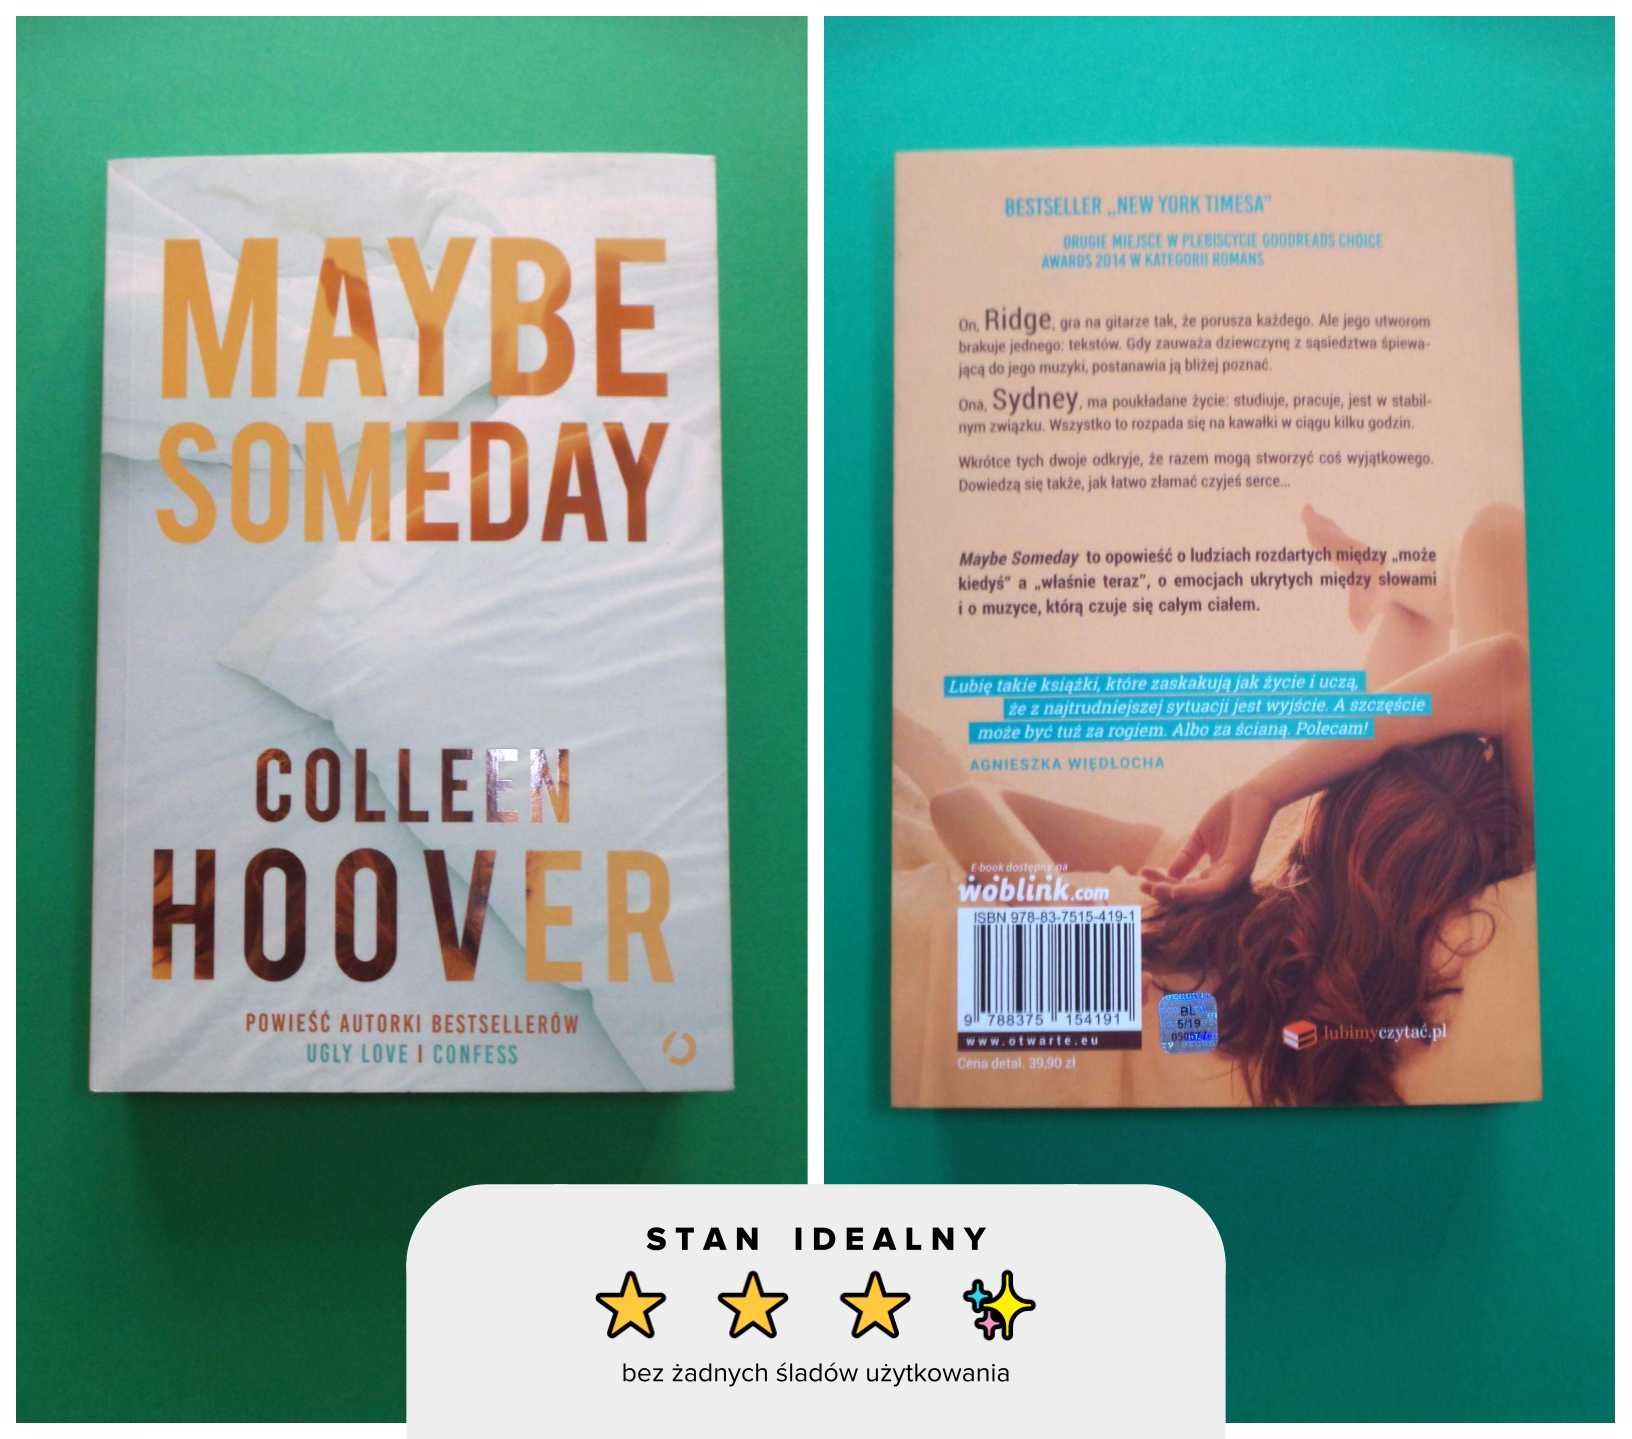 Colleen Hoover — Maybe someday (stan idealny)